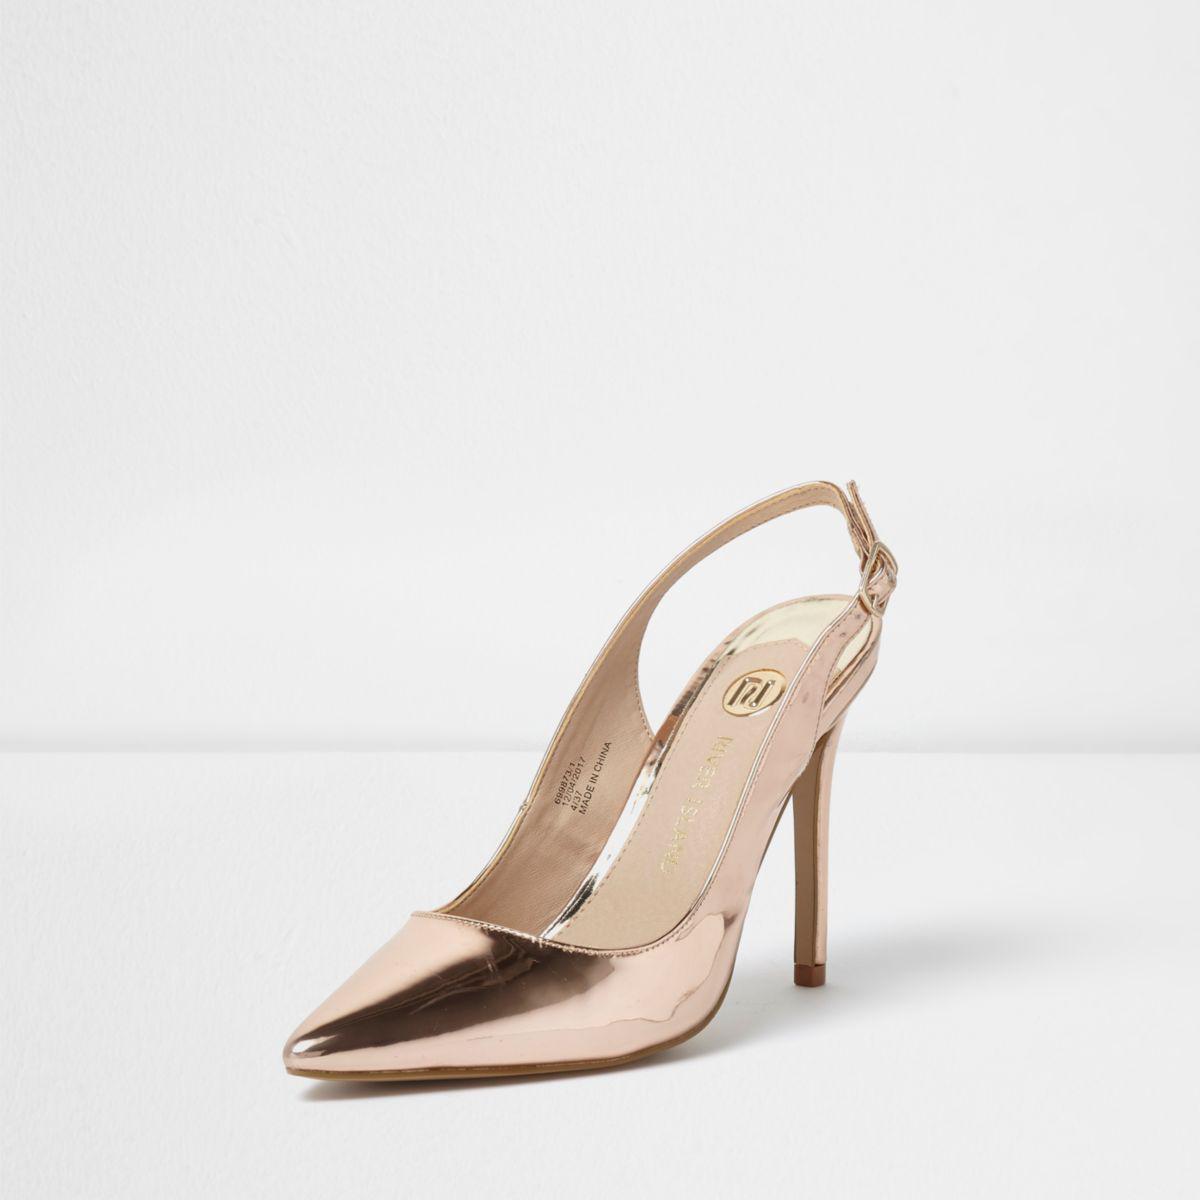 River Island's £33 slingback heels are a perfect dupe for Chanel's